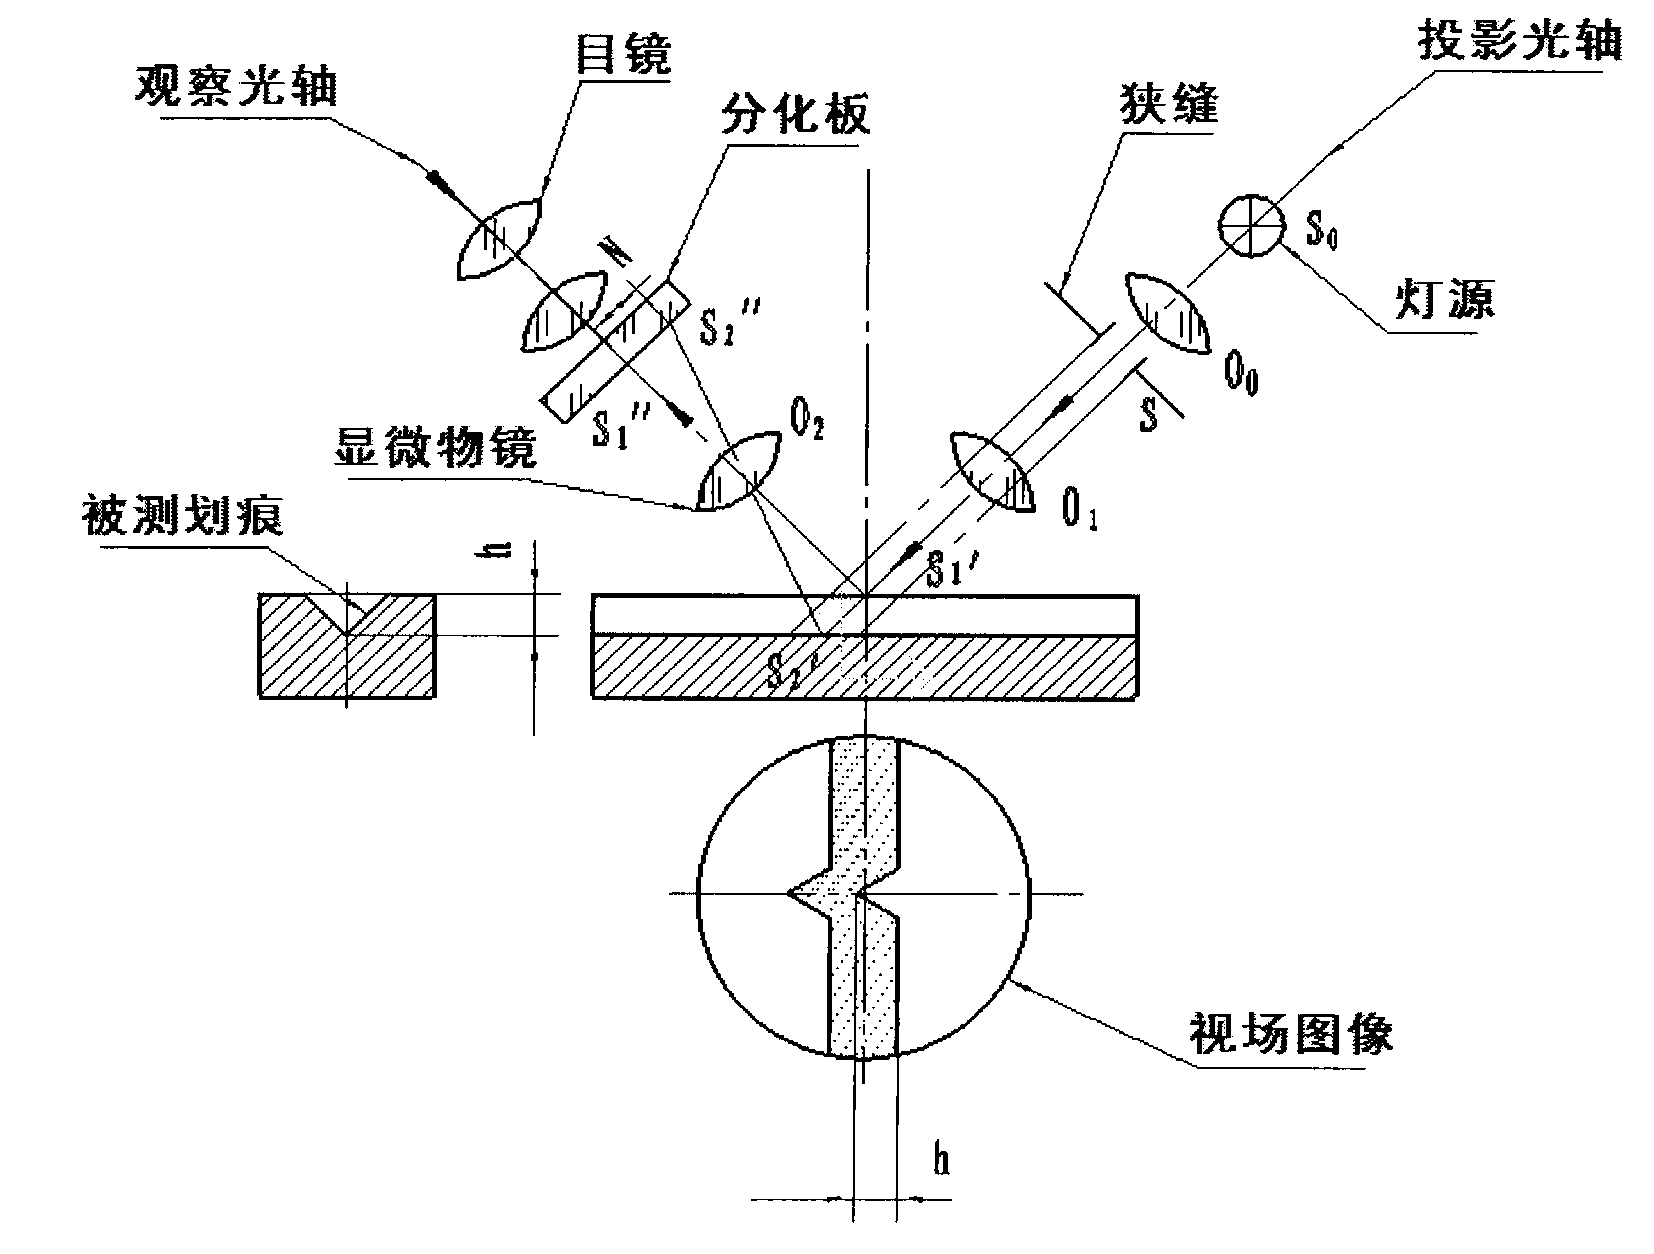 Device for detecting damage depth of object surface scratch